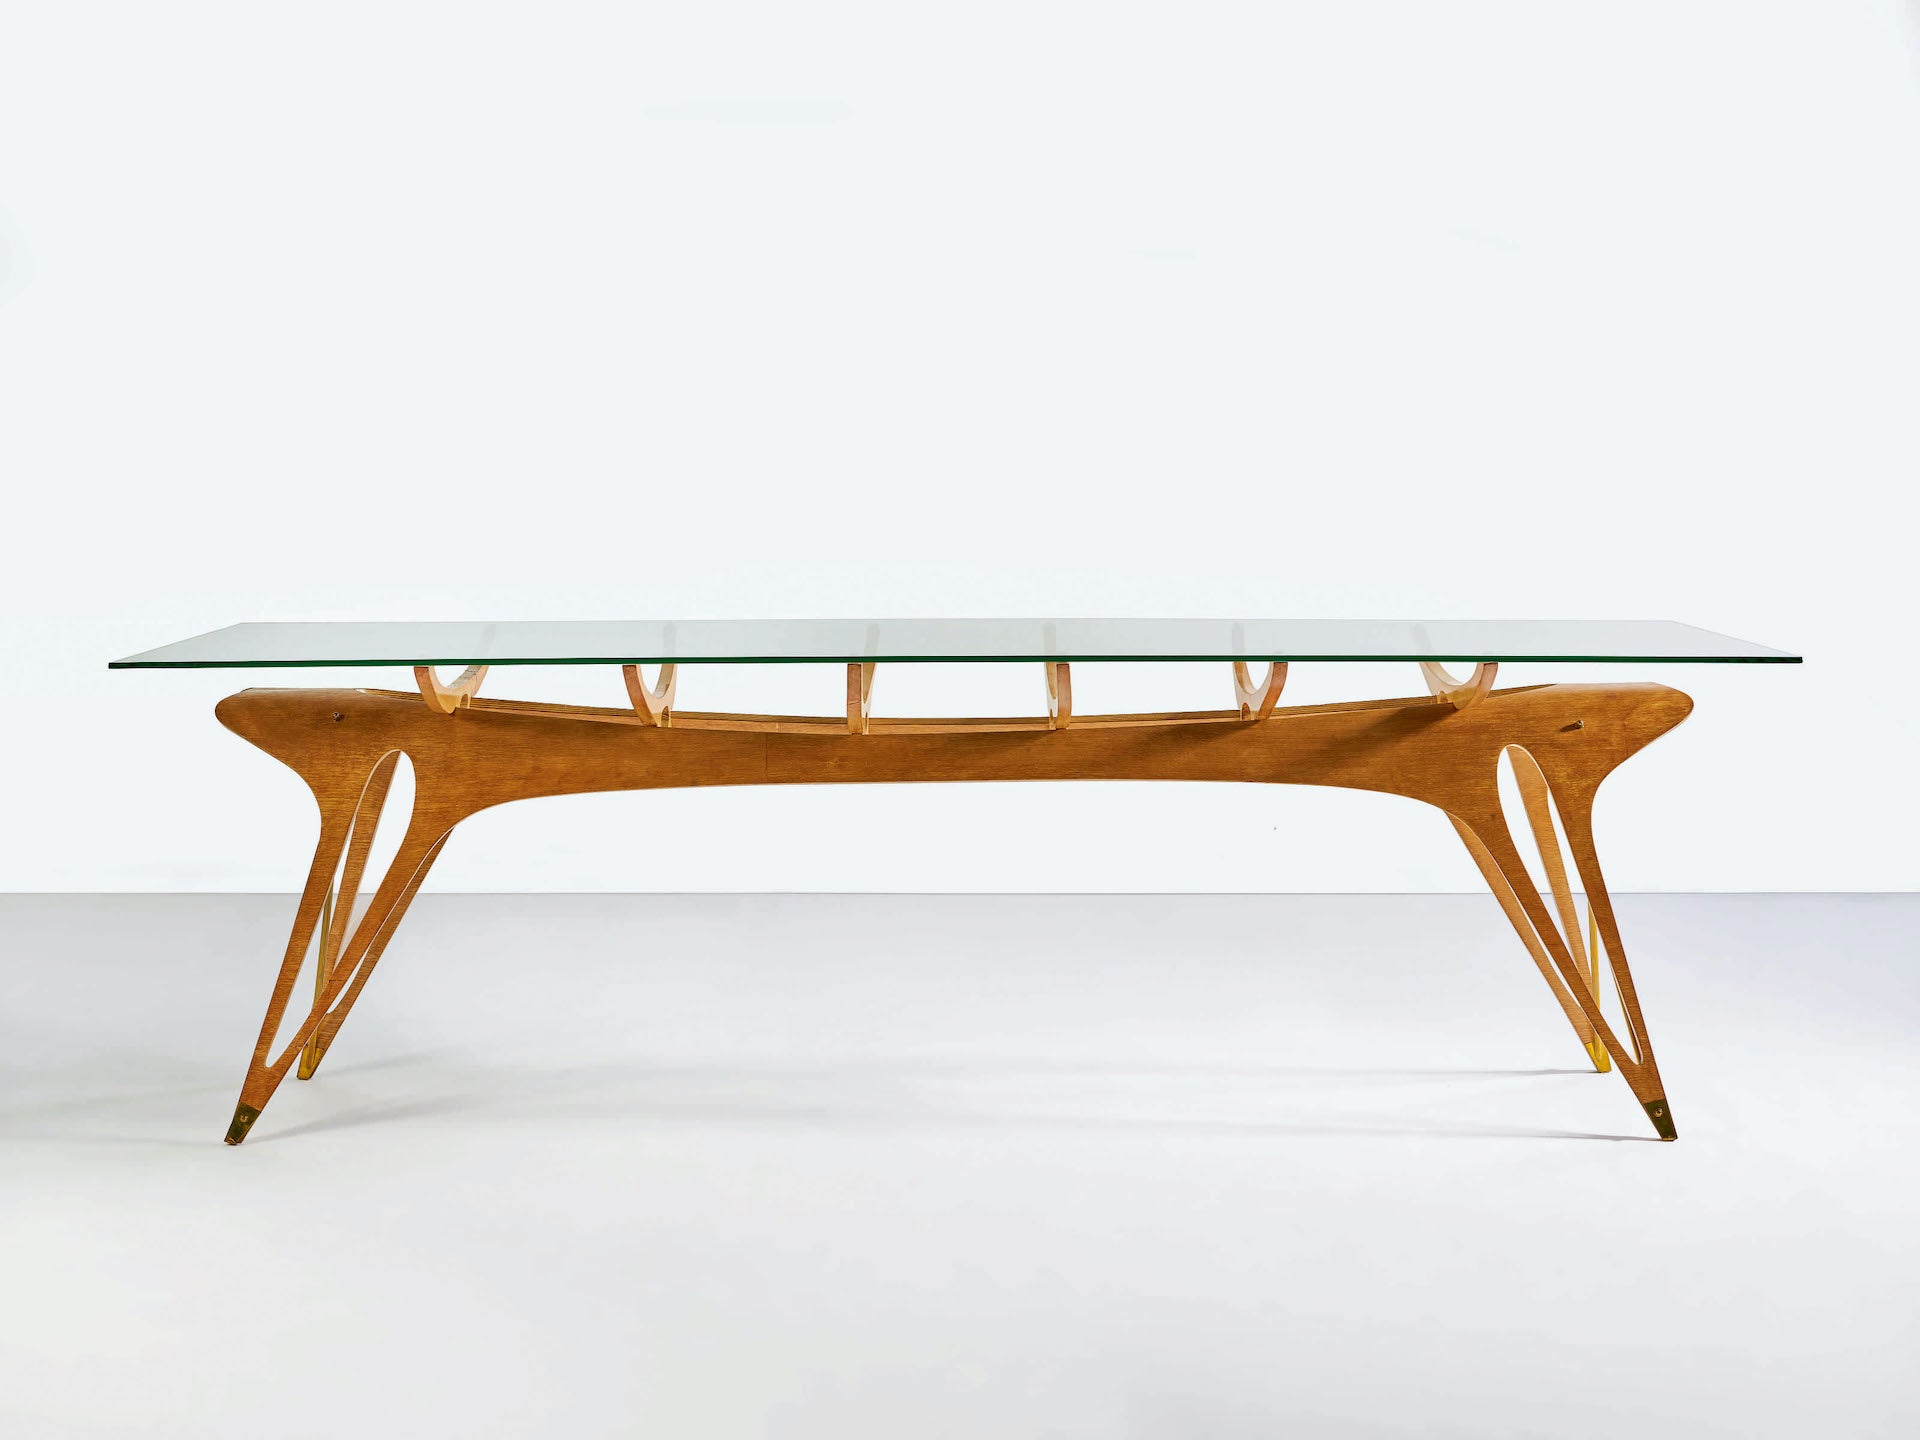 Important & Unique Dining Table by Carlo Mollino, designed 1949, executed 1950; Sold for $6,181,350 at Sotheby’s New York 28 October 2020. Photo © Sotheby's